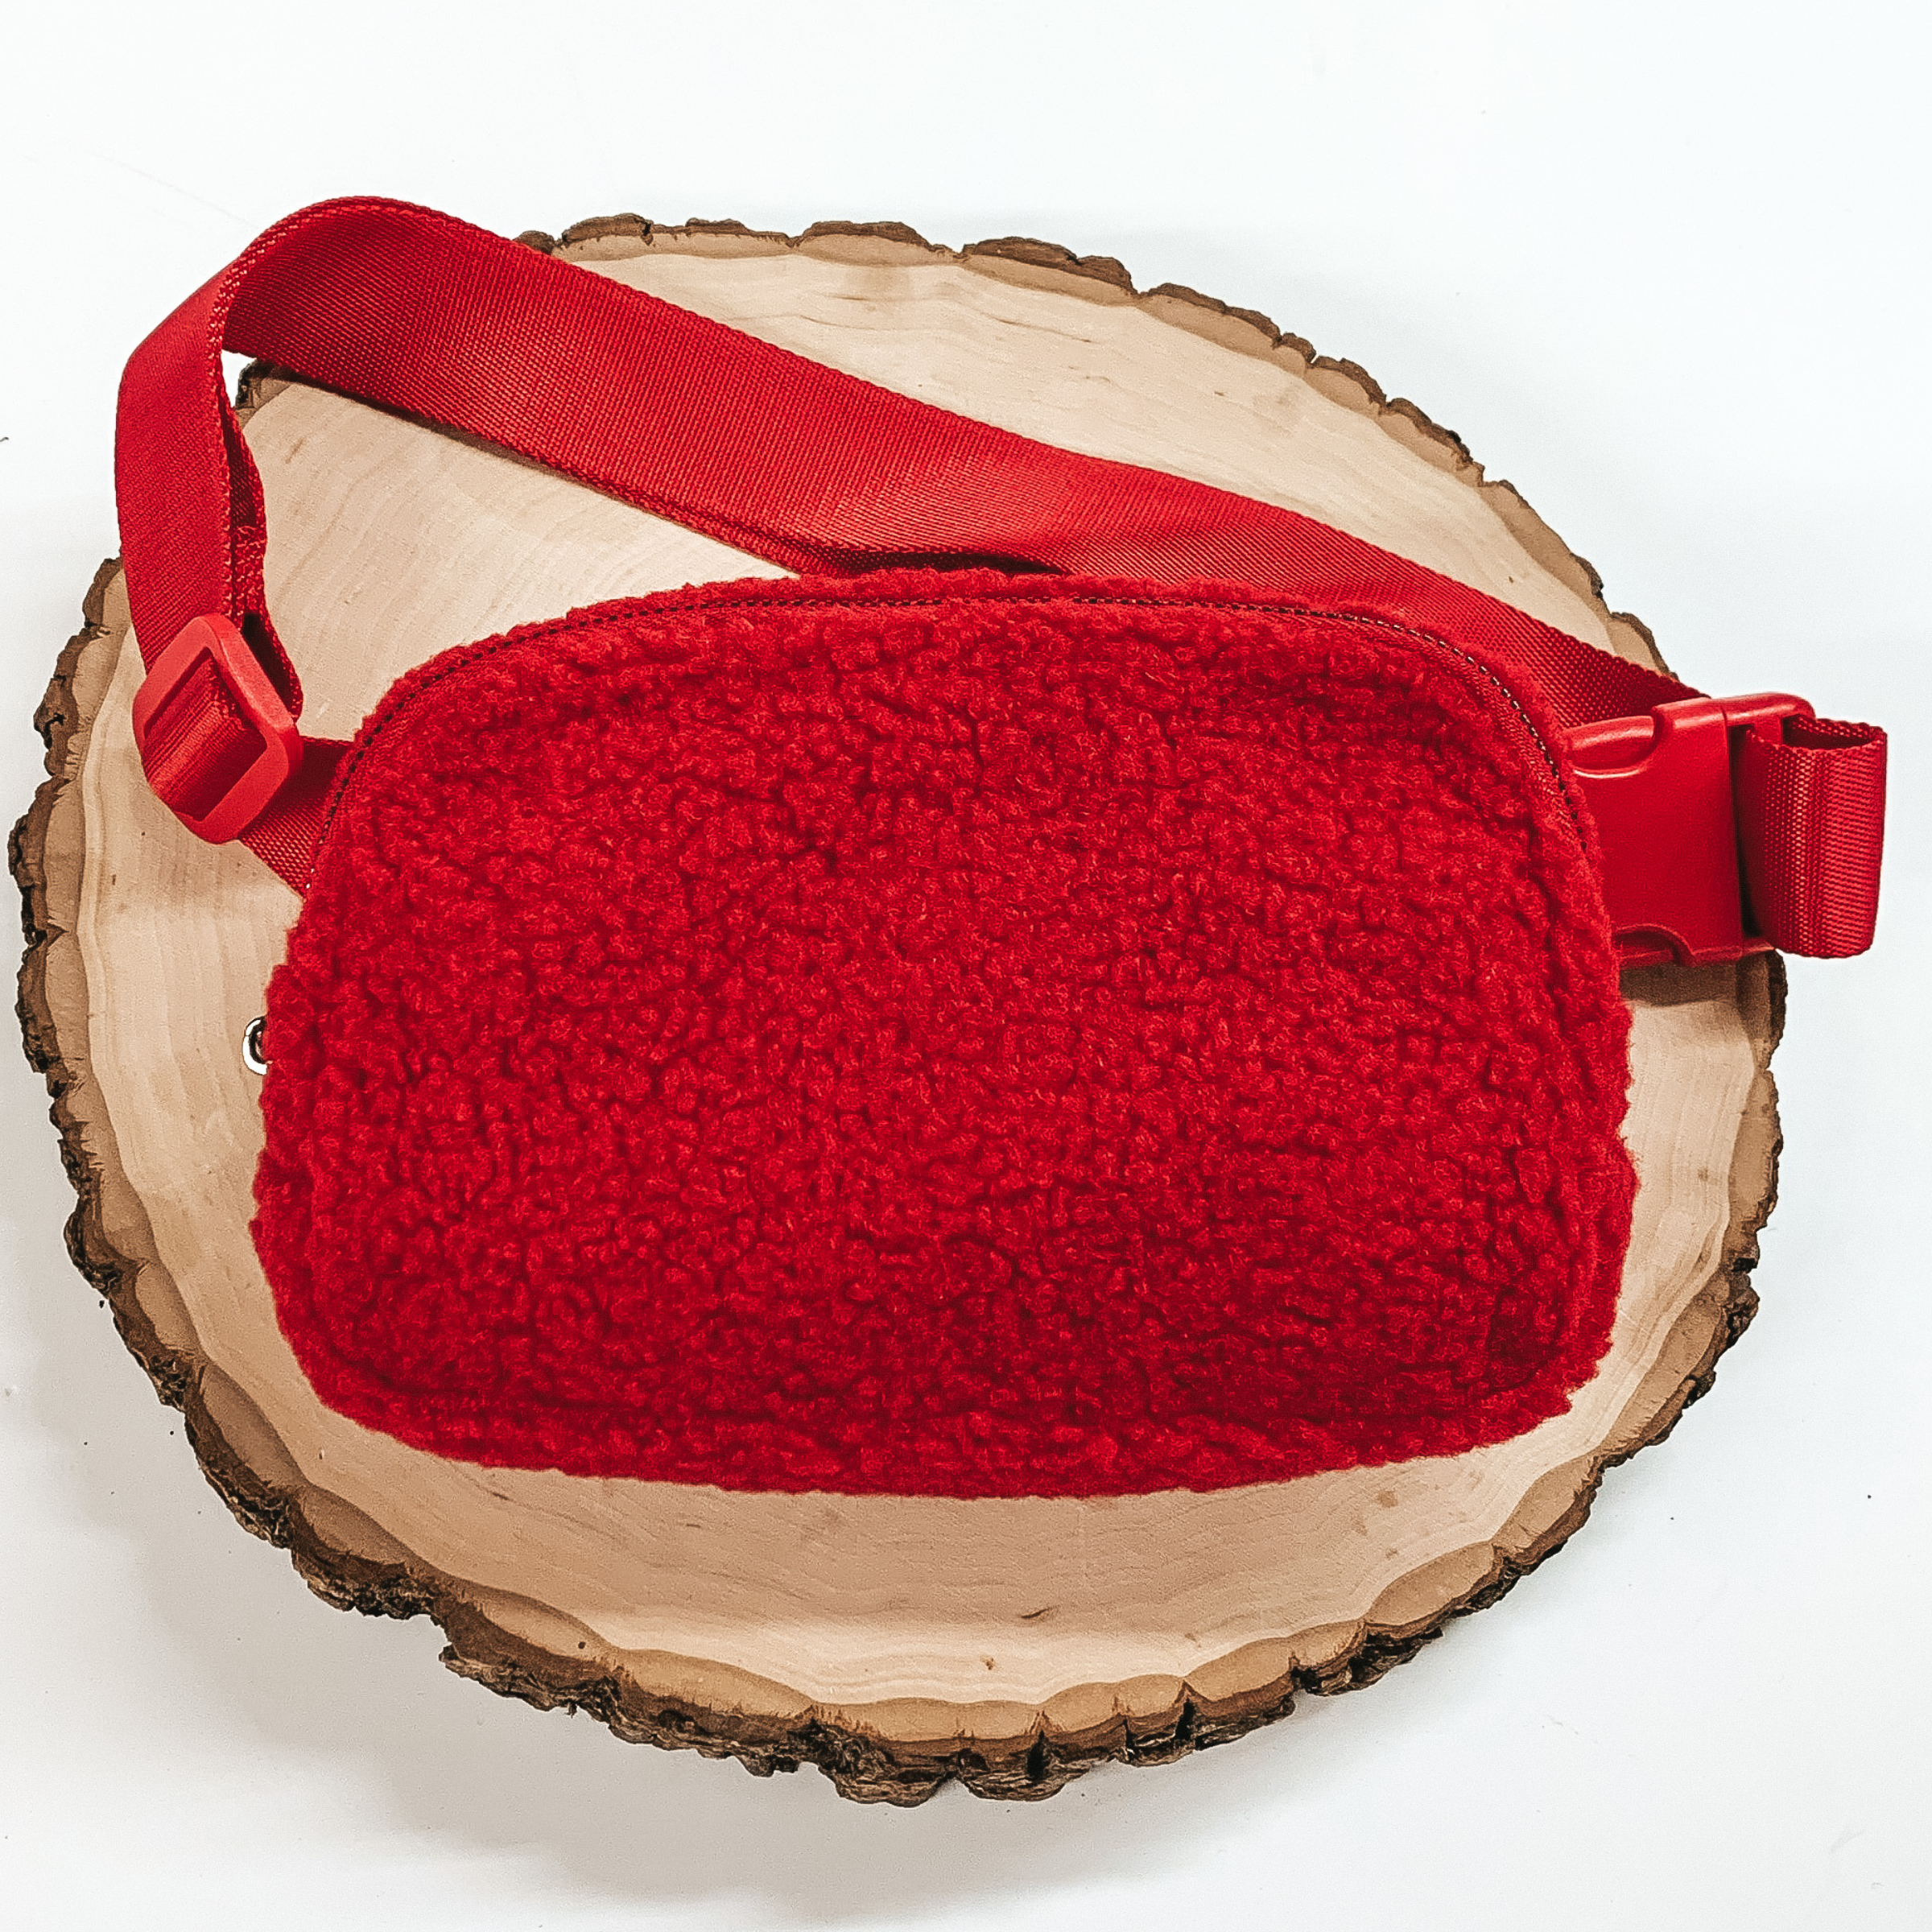 Red, sherpa fanny pack with a top zipper across the front. This fanny pack also includes red straps and red clips. This fanny pack is pictured on a piece of wood on a white background. 